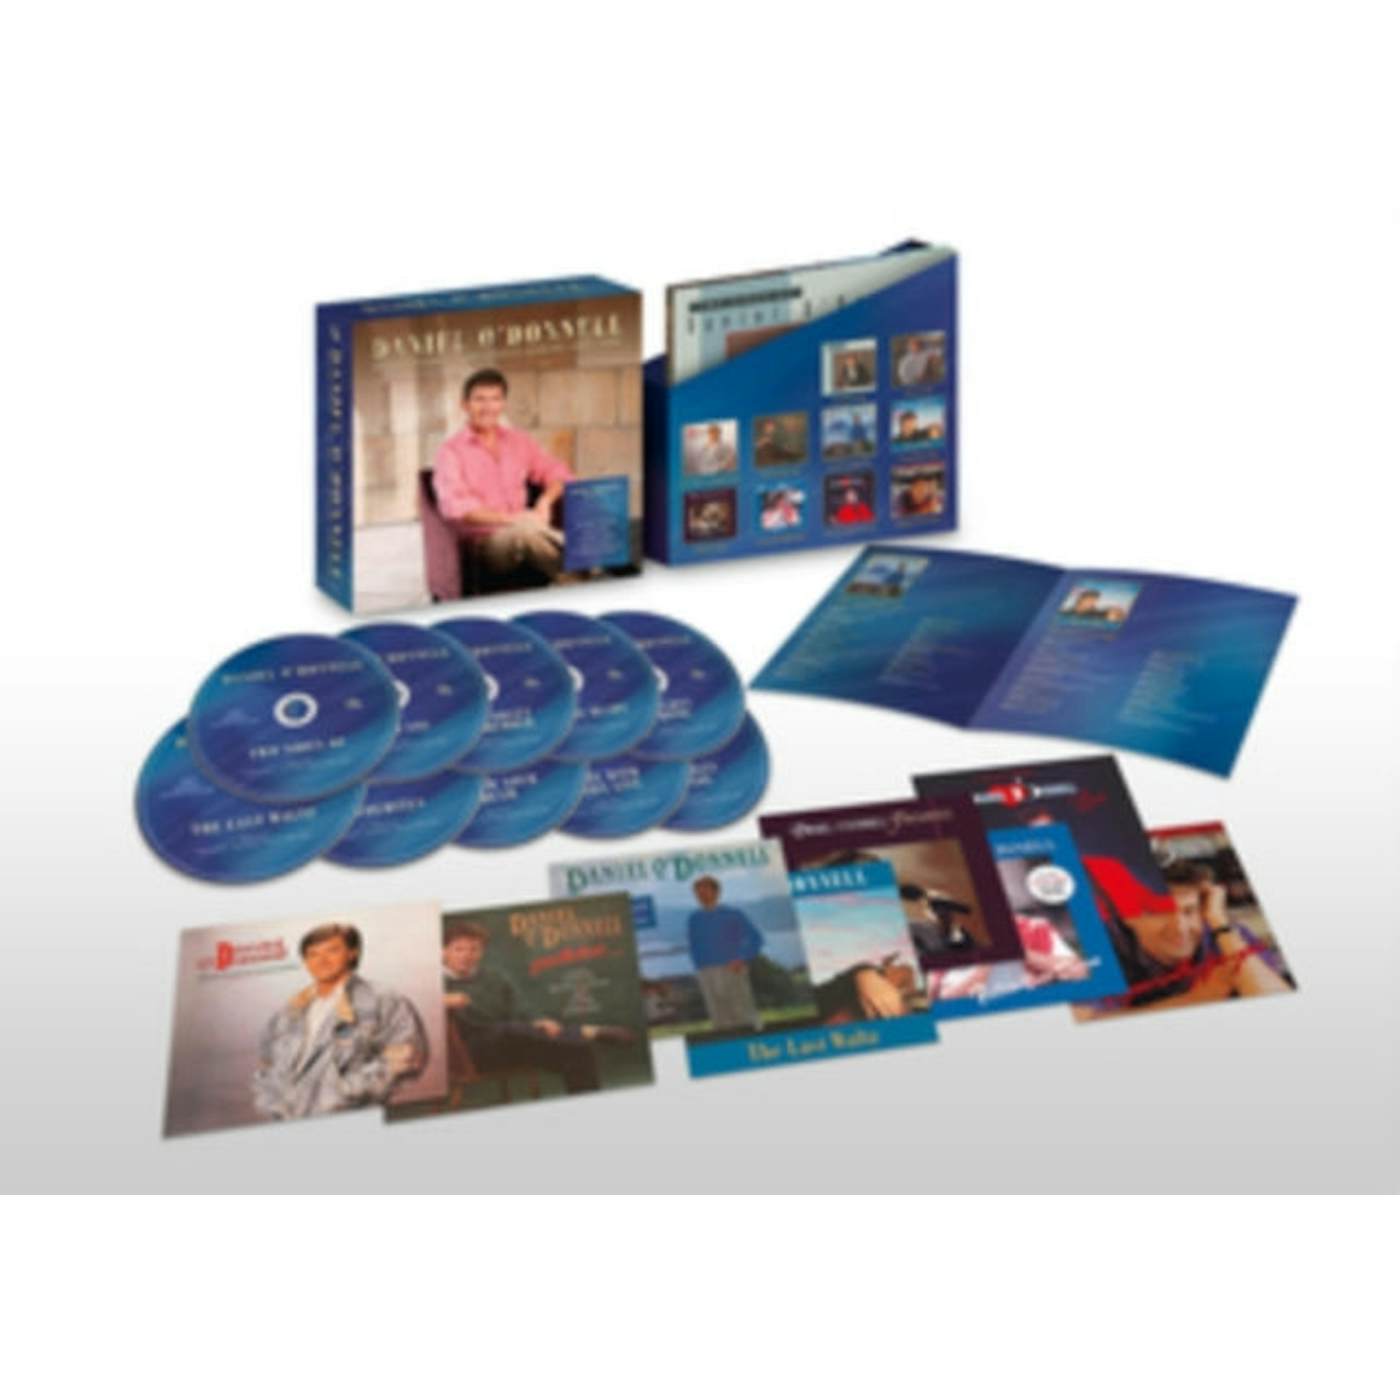 Daniel O'donnell CD - Reflections - The Studio Albums 19 85-19 94